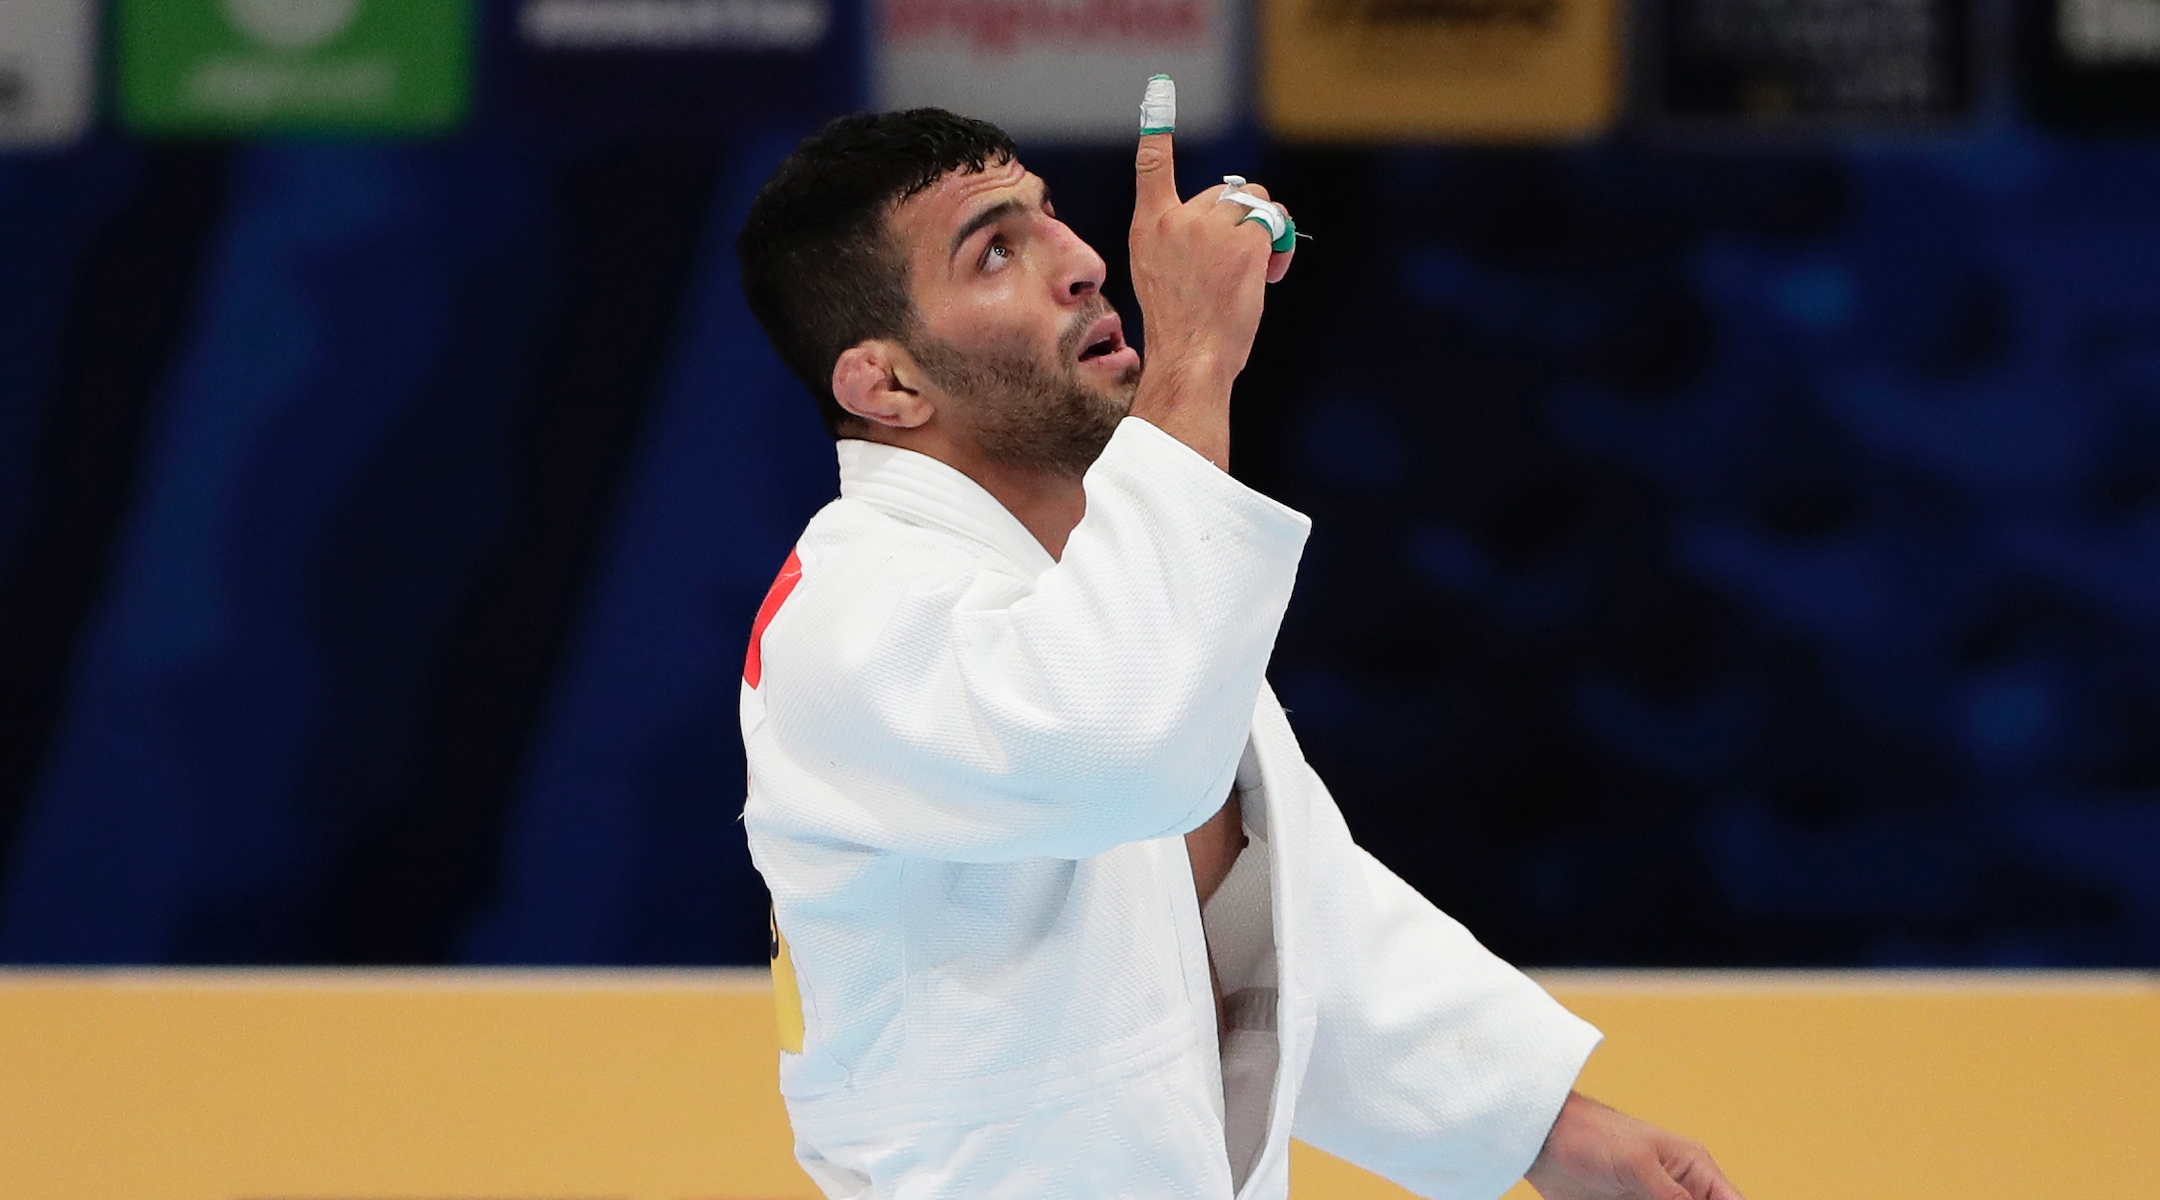 Saeid Mollaei reacts after a victory at the World Judo Championships in Tokyo, Aug. 28, 2019. (Kiyoshi Ota/Getty Images)